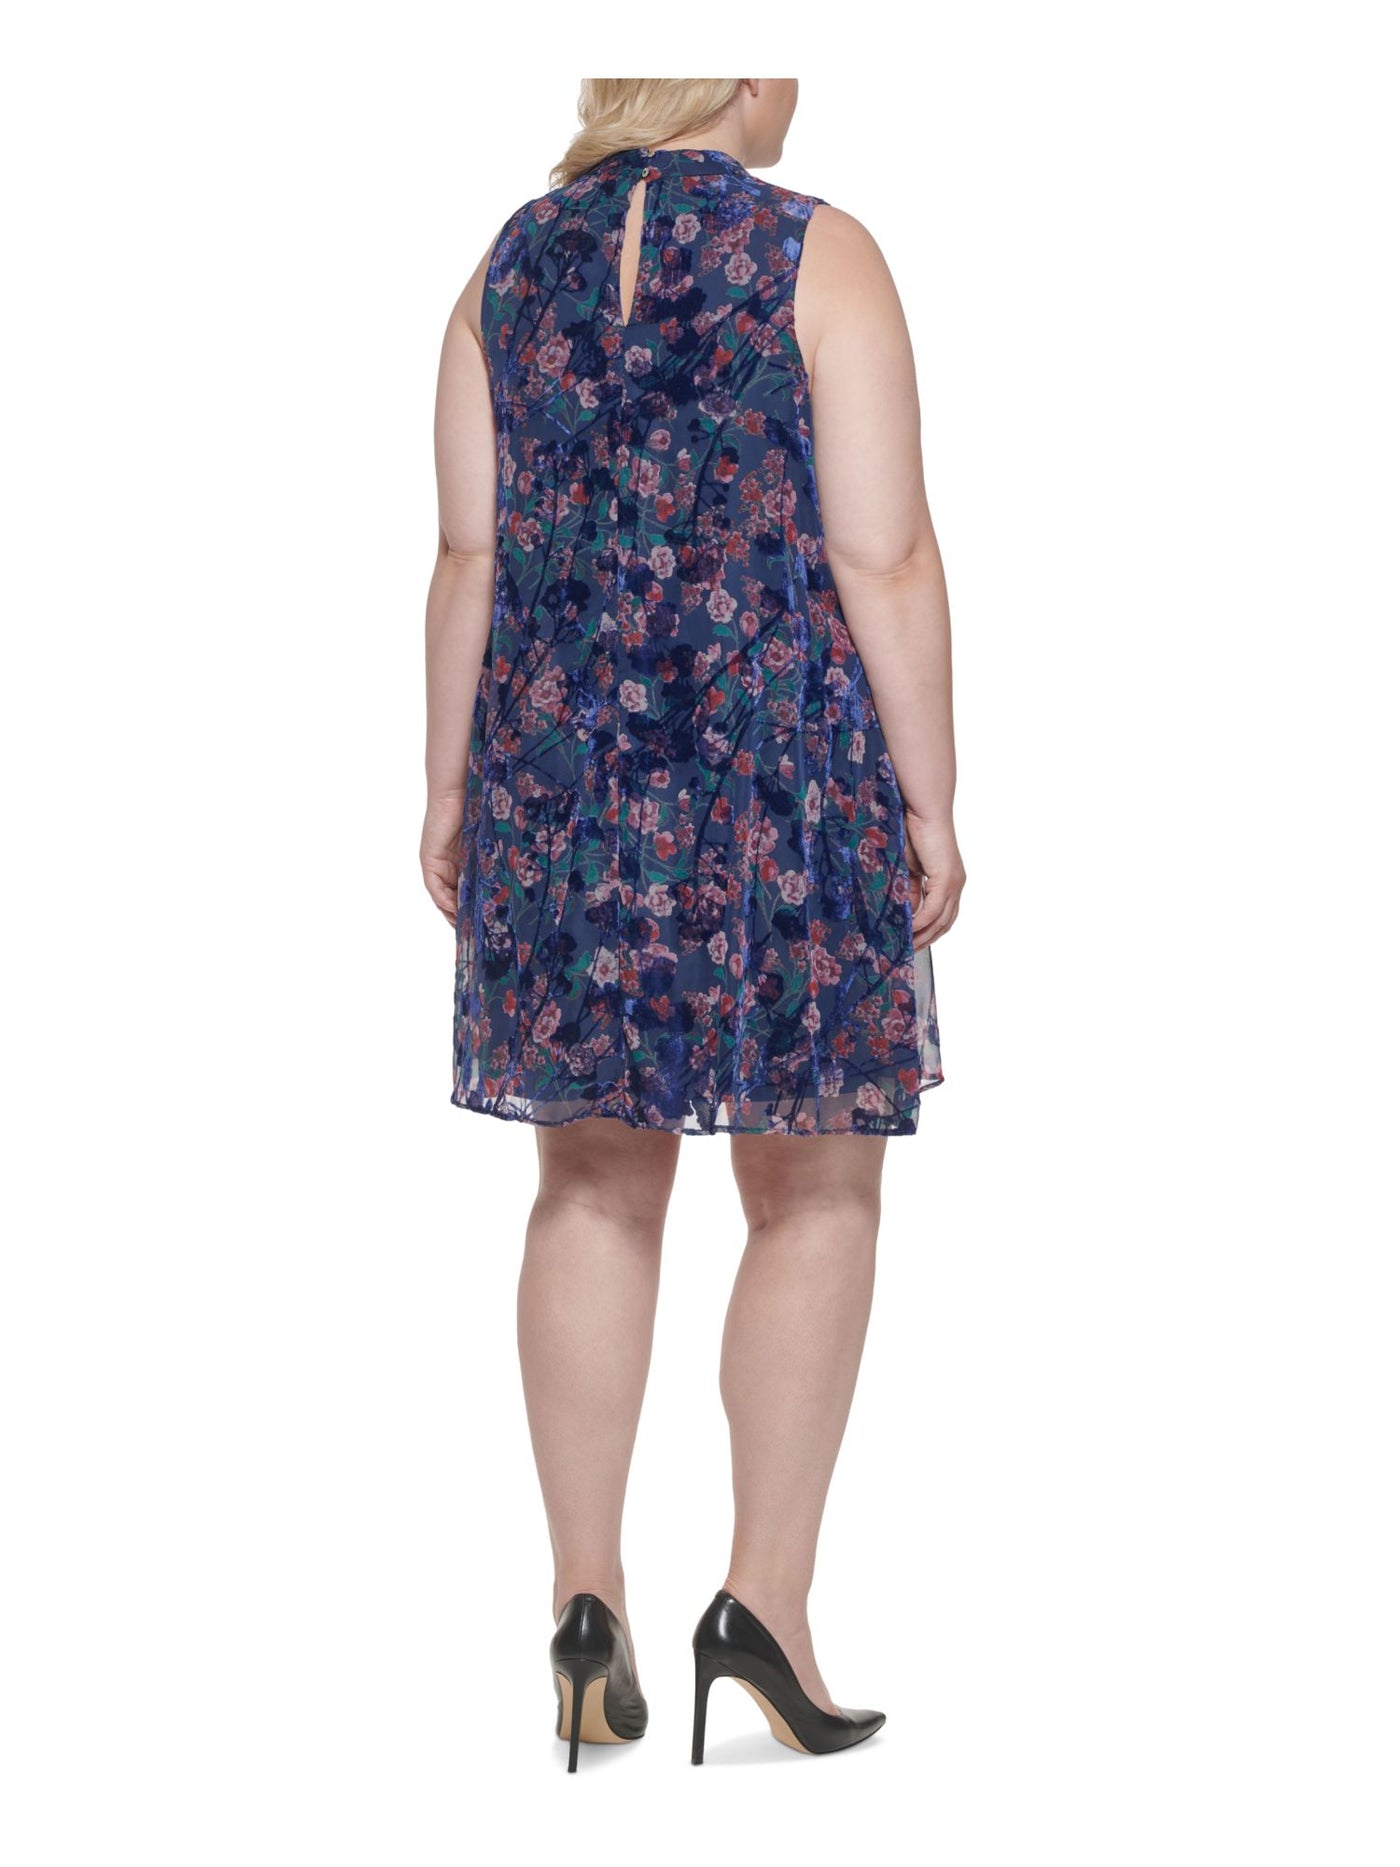 TOMMY HILFIGER Womens Navy Sheer Mixed Media Floral Sleeveless Mock Neck Above The Knee Shift Dress Plus 20W